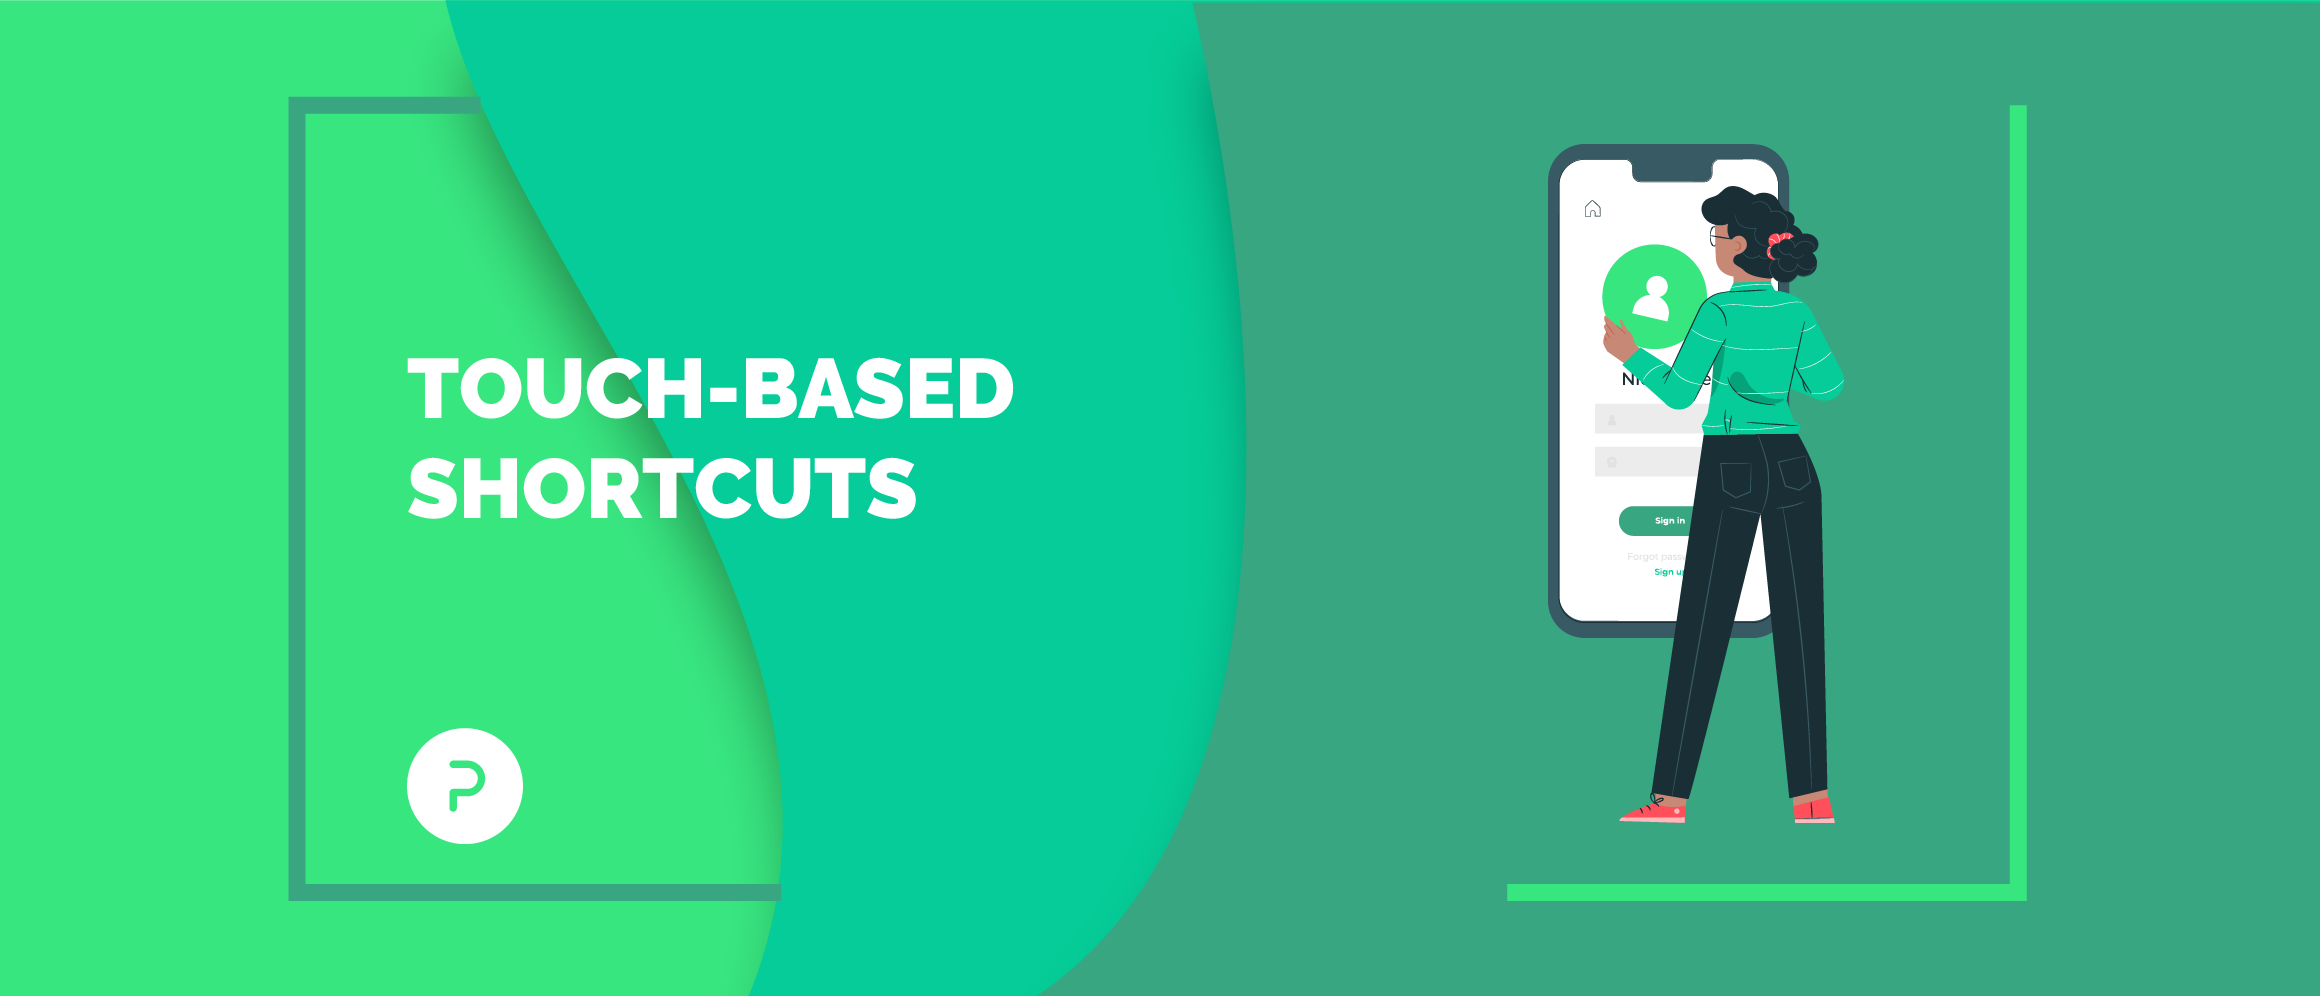 Touch-Based Shortcuts: 4 Tips for Using Accelerators to Improve UX in Mobile Apps